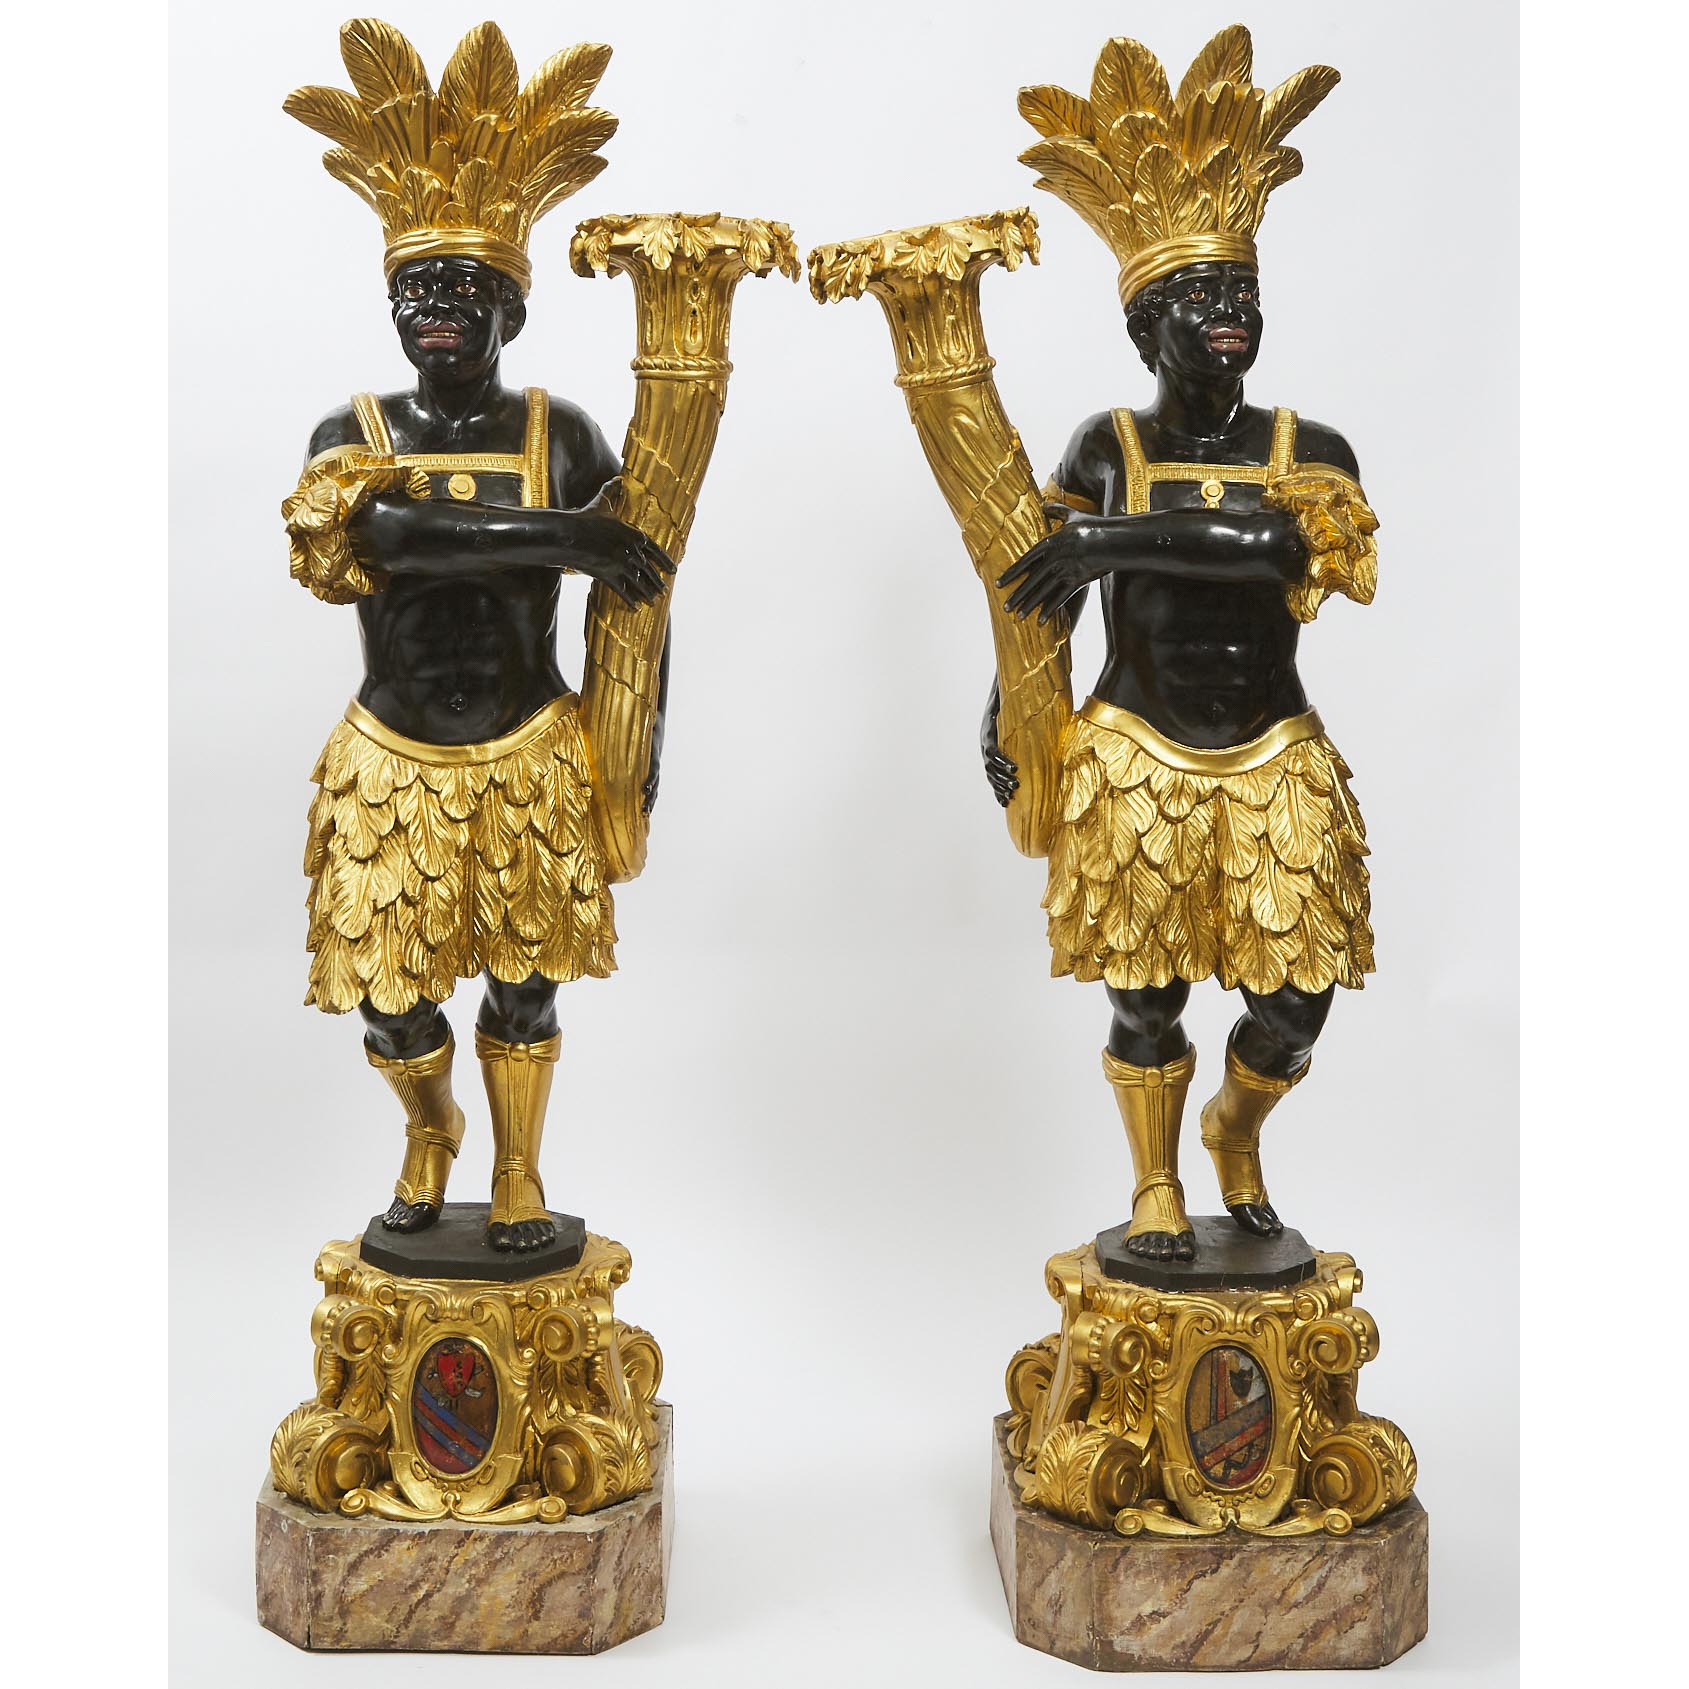 Pair of Florentine Carved, Polychromed and Parcel Gilt Blackamoor Figures, 20th century